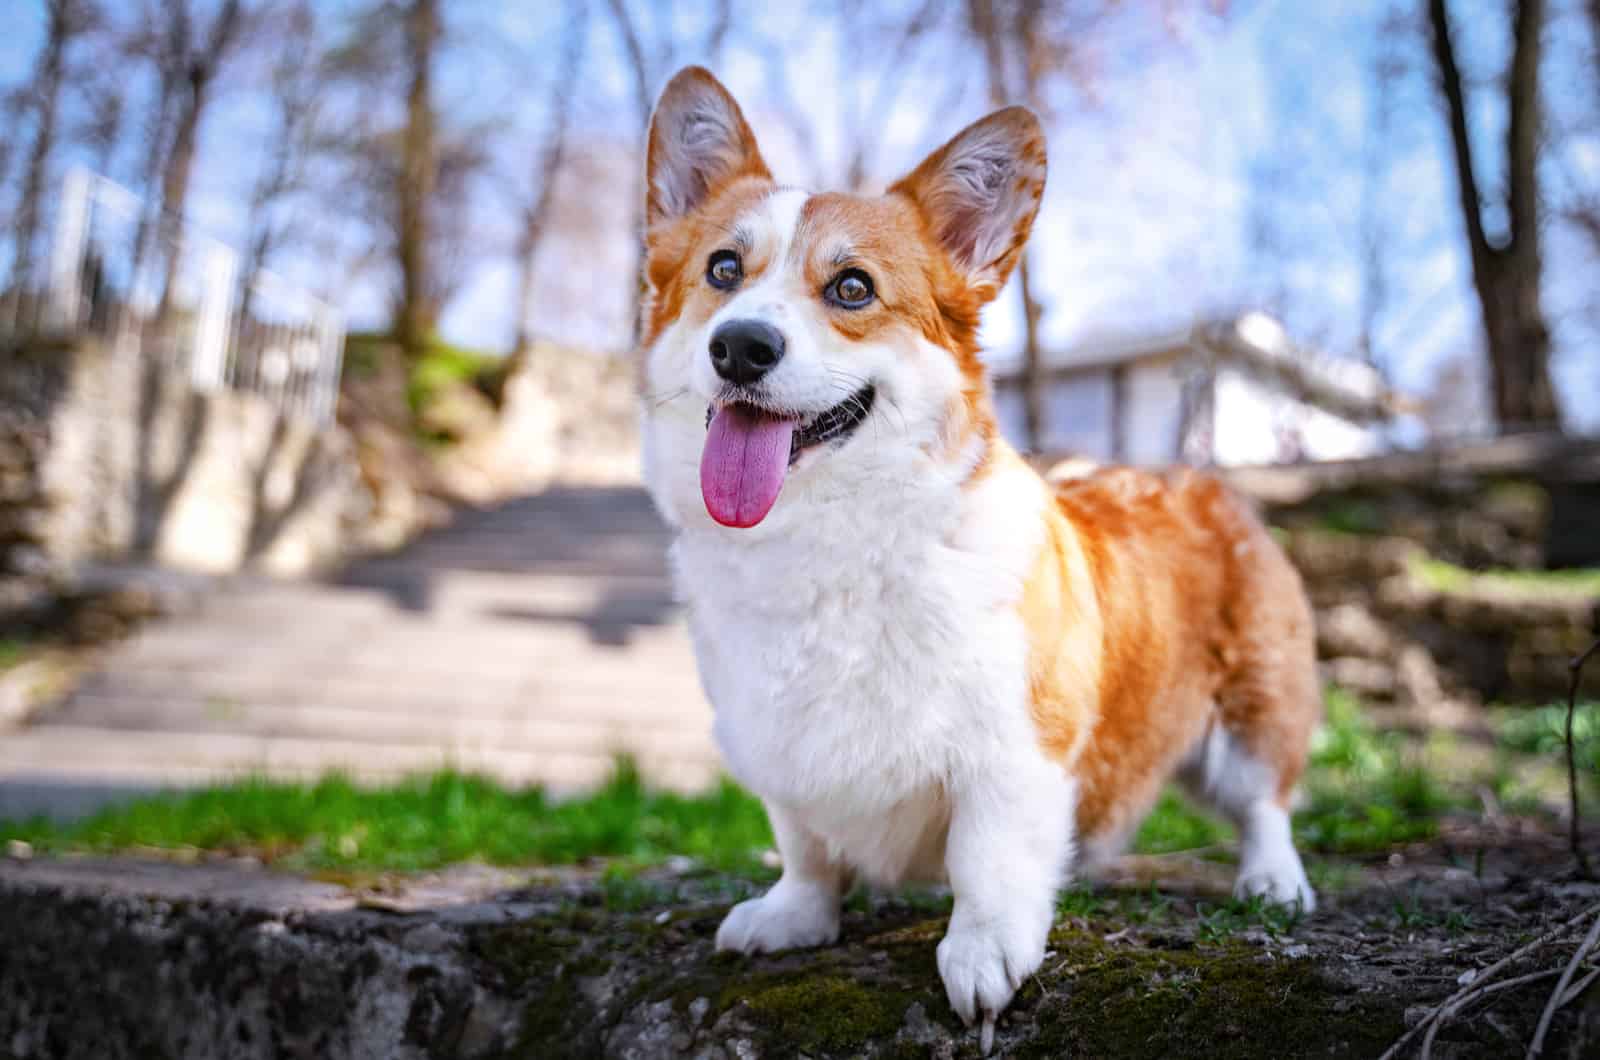 Corgi stands with tongue out